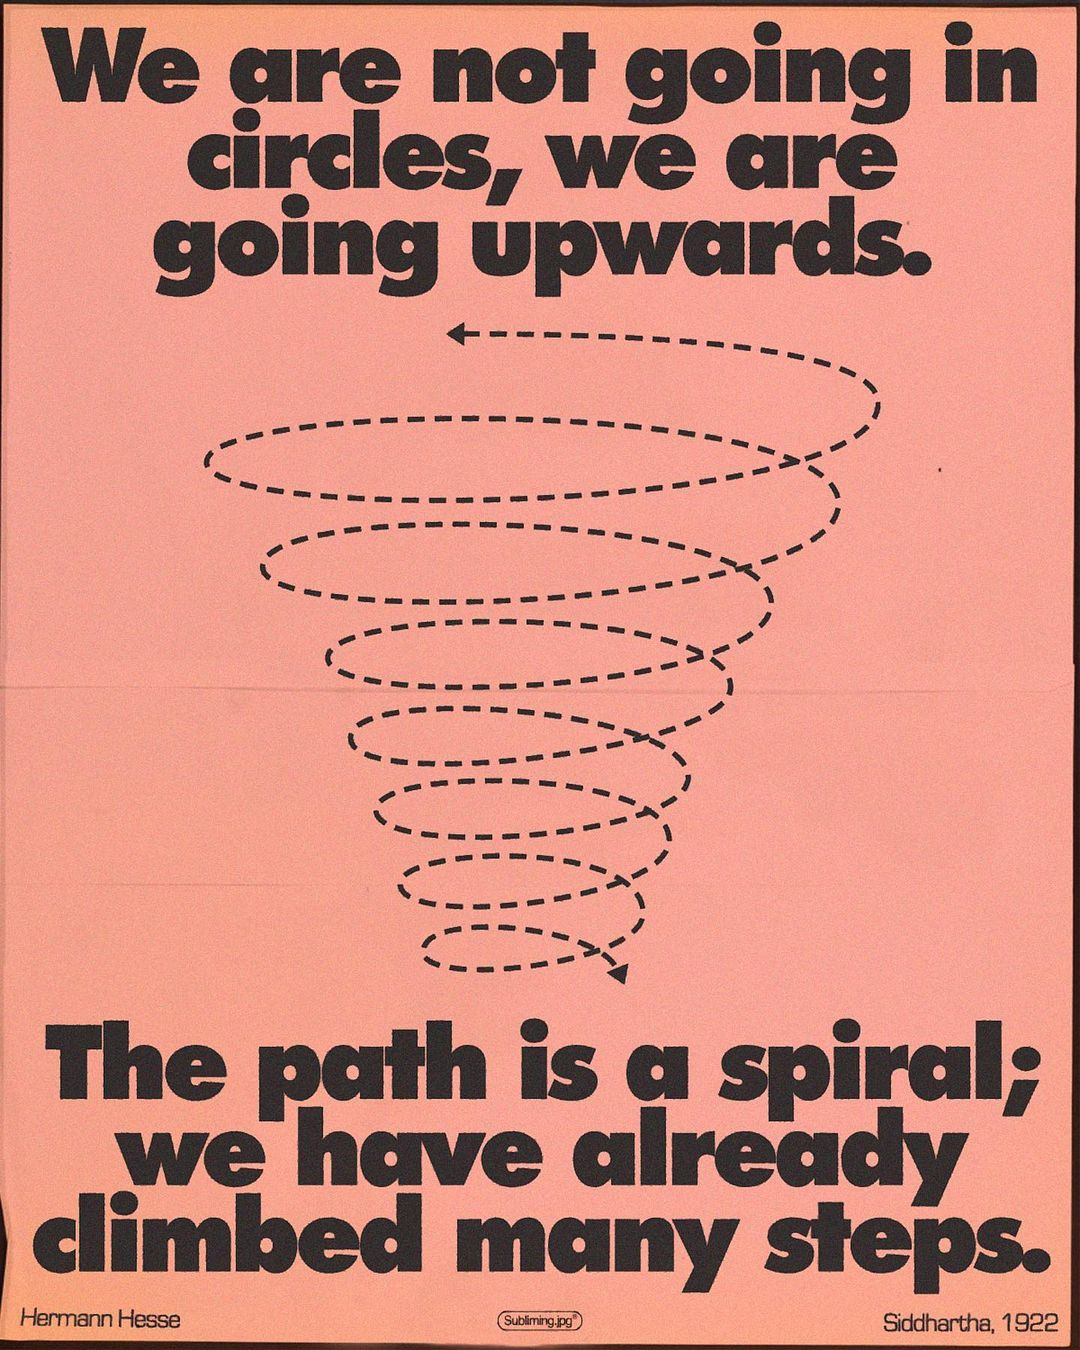 Black text on a peach background reads "We are not going in circles, we are going upwards. The path is a spiral, we have already climbed many steps."